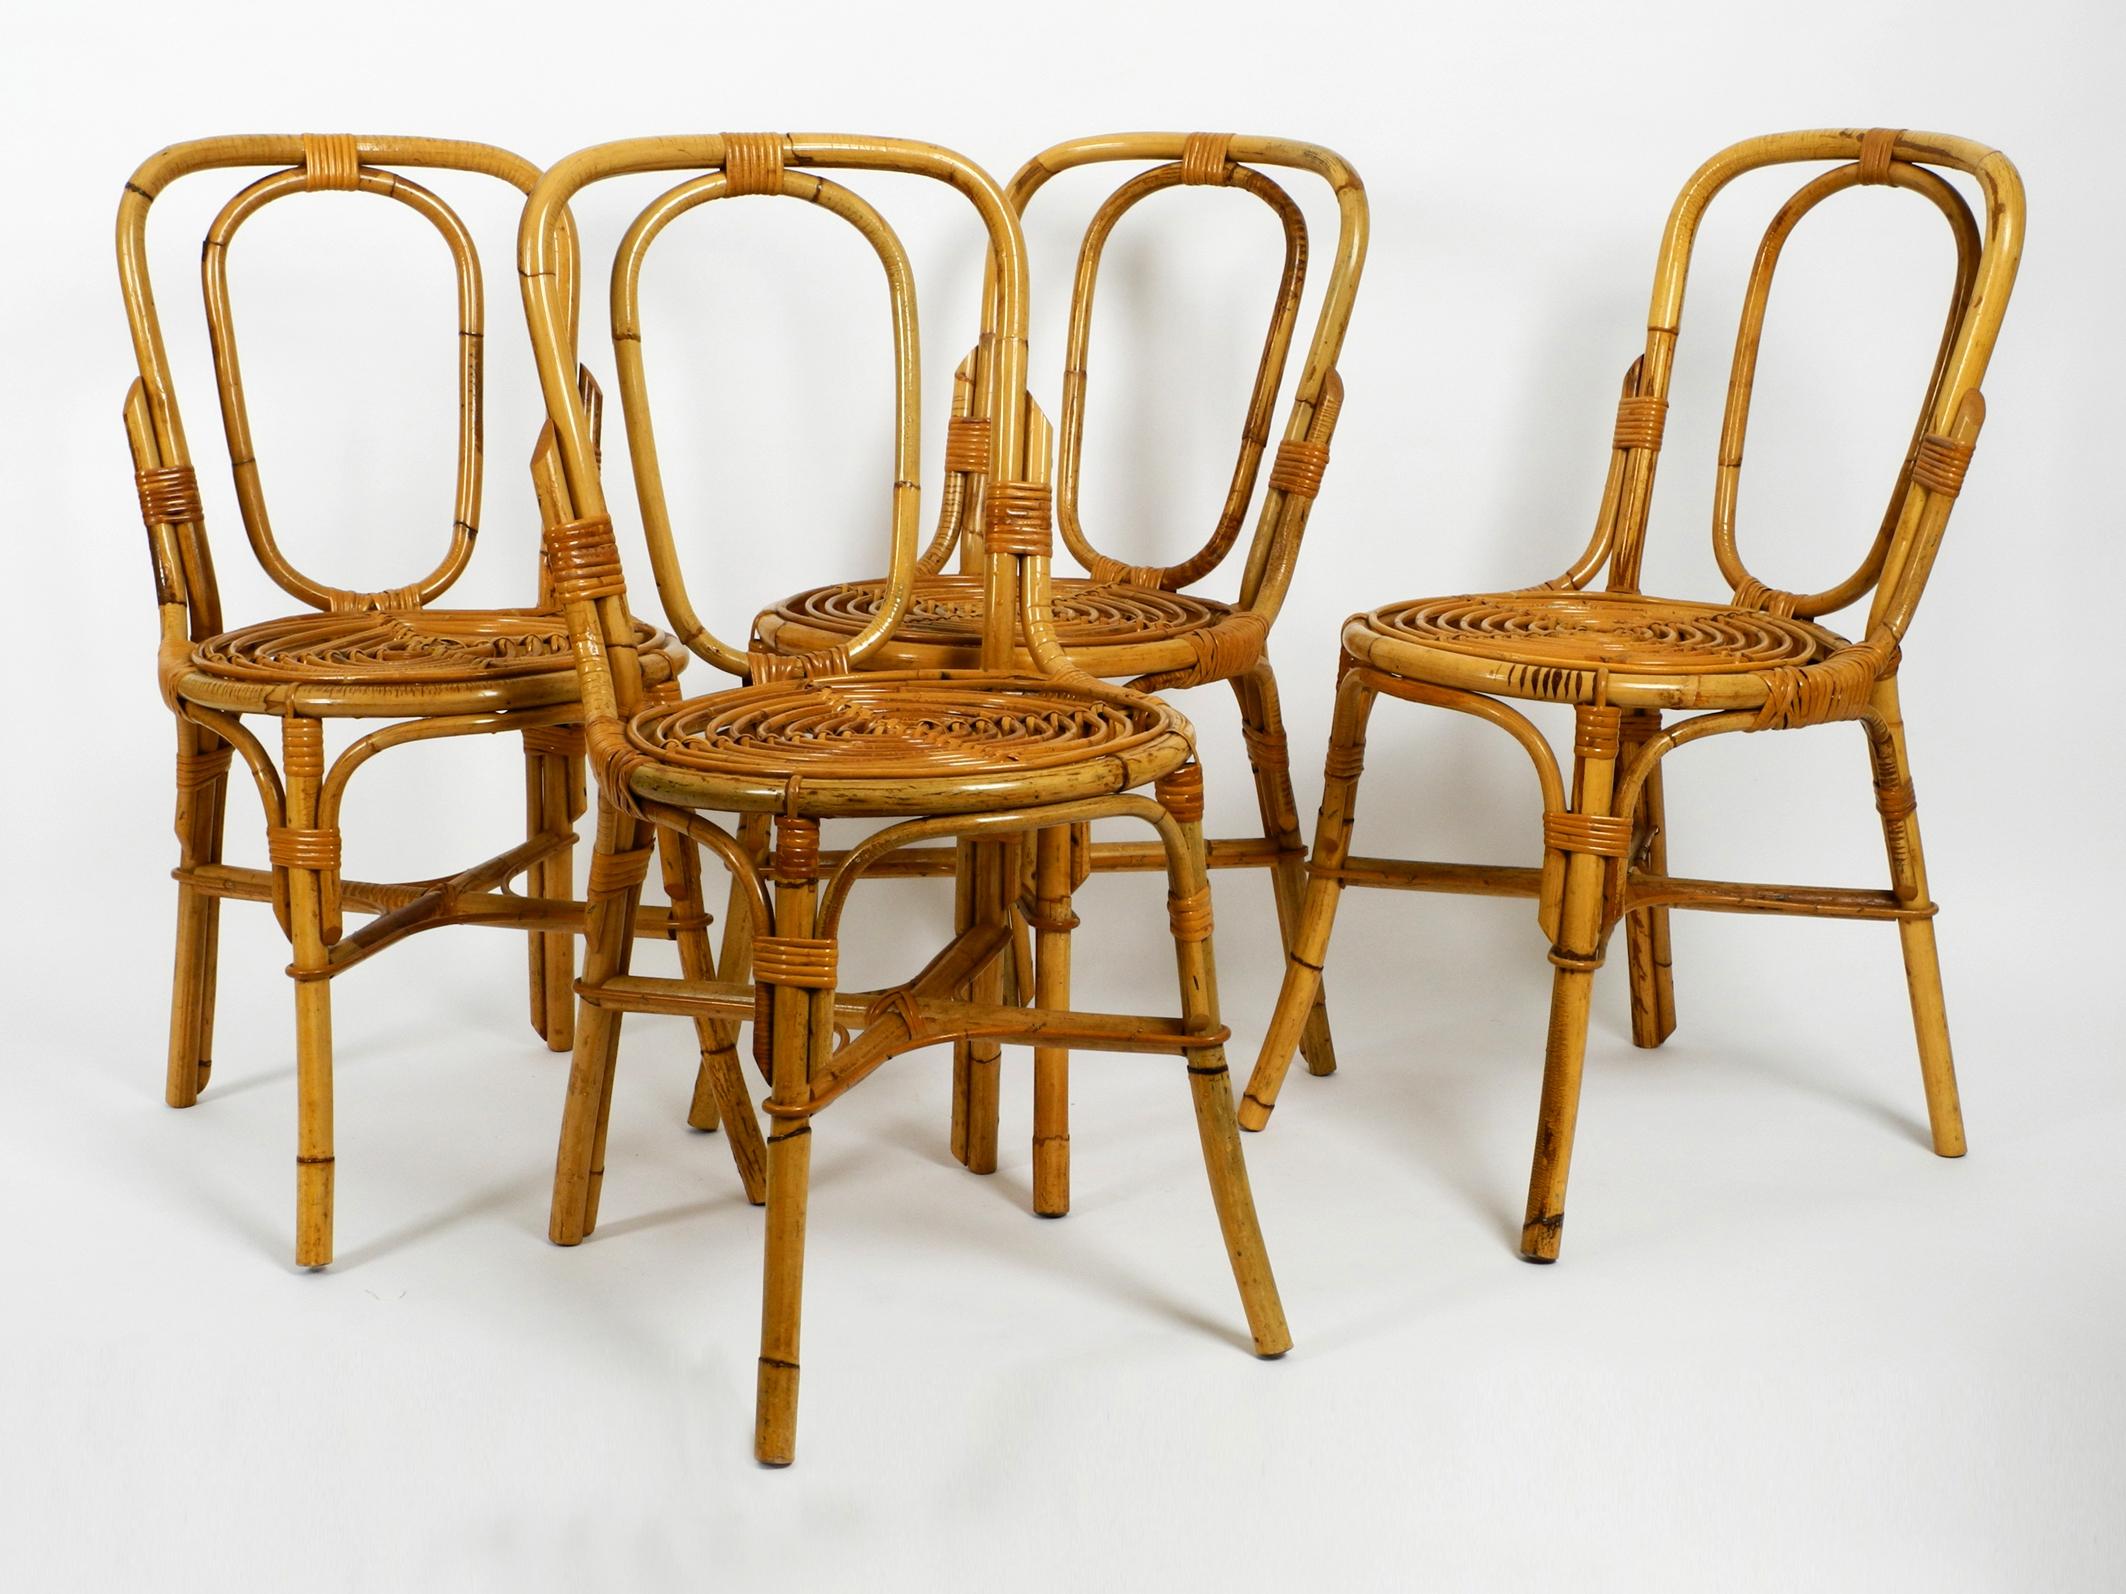 Four rare and extraordinary 1960s bamboo dining chairs in very good vintage condition. 
Made in Italy. Beautiful design and very comfortable to sit on.
Completely made of bamboo very elaborate design.
All four chairs in very same good condition